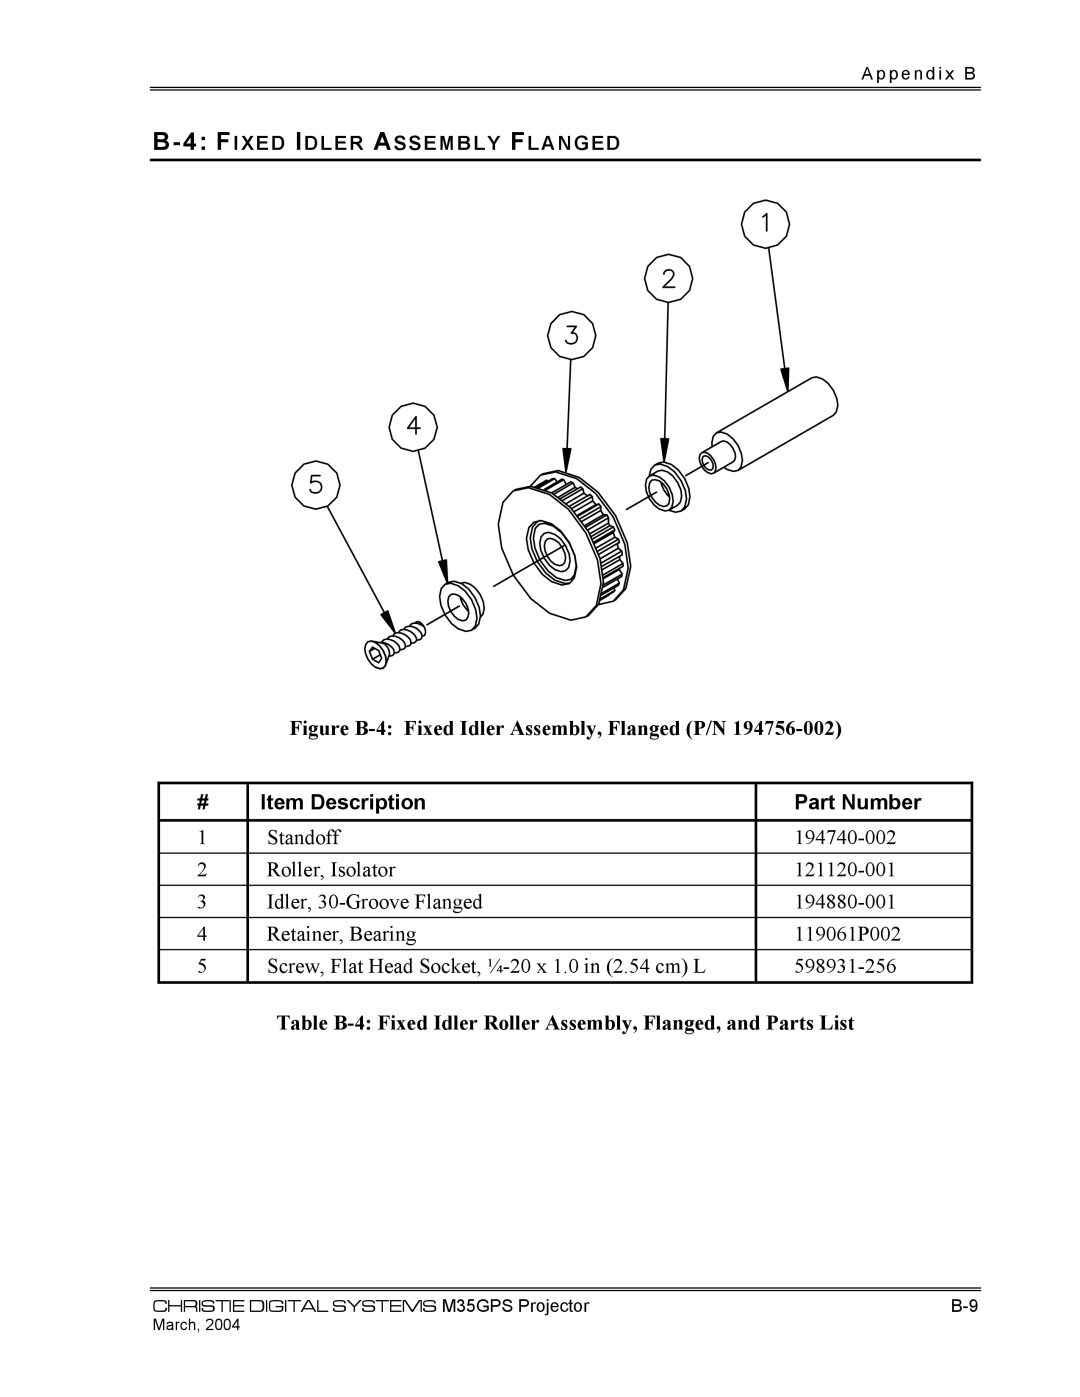 Christie Digital Systems P35GPS-MT, P35GPS-AT operating instructions Figure B-4 Fixed Idler Assembly, Flanged P/N 